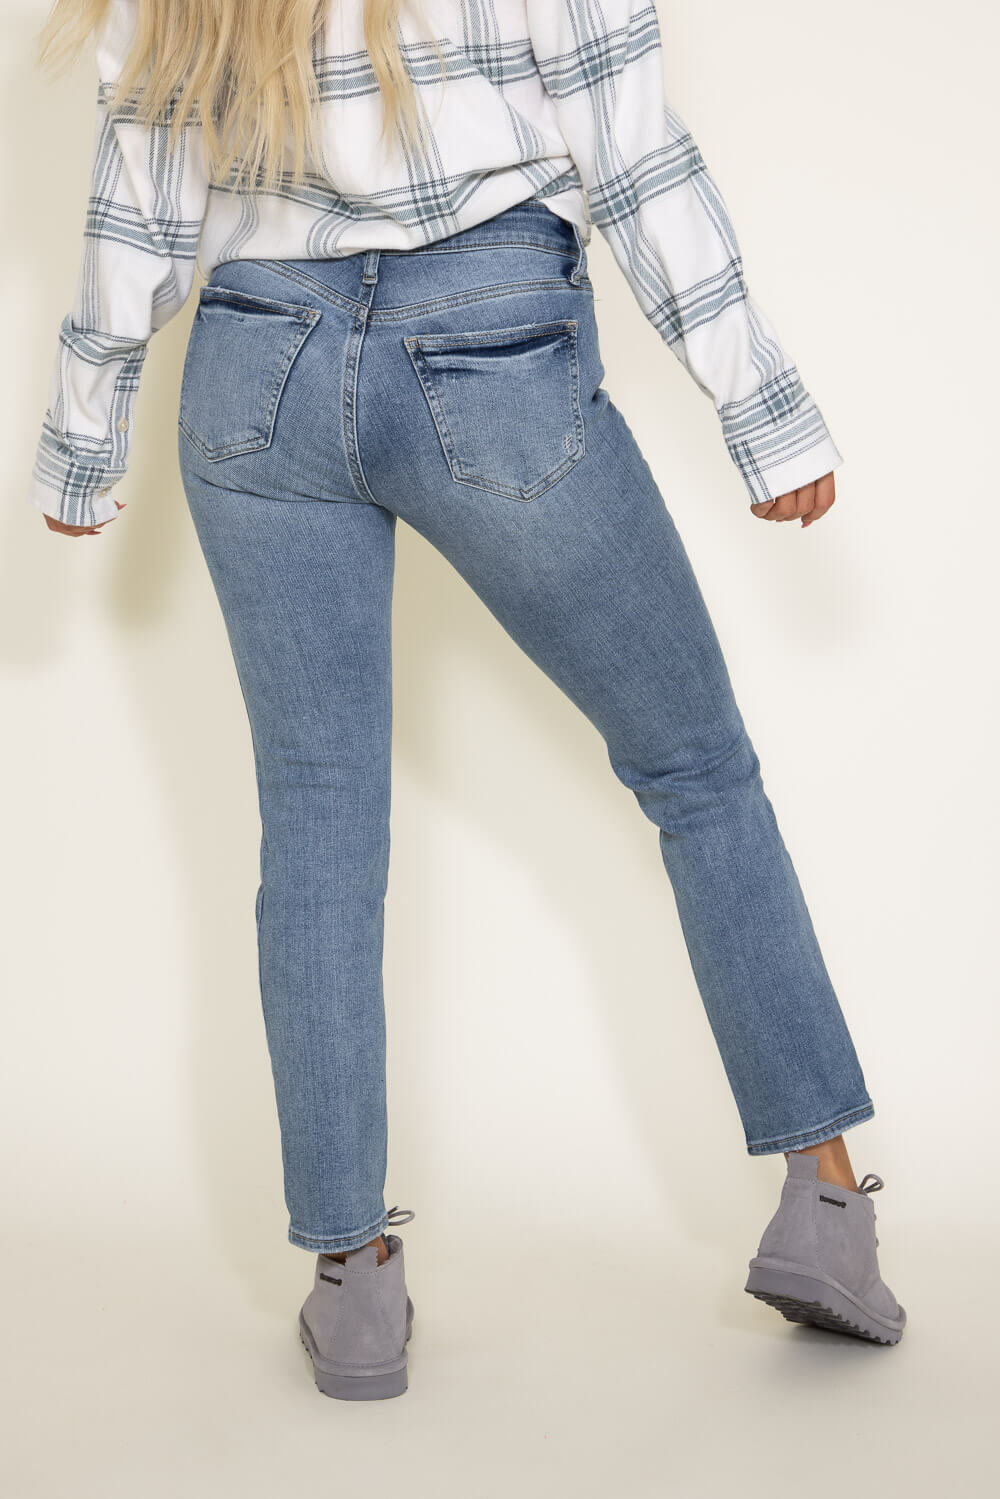 Mica High Rise Boot Cut Jeans for Women